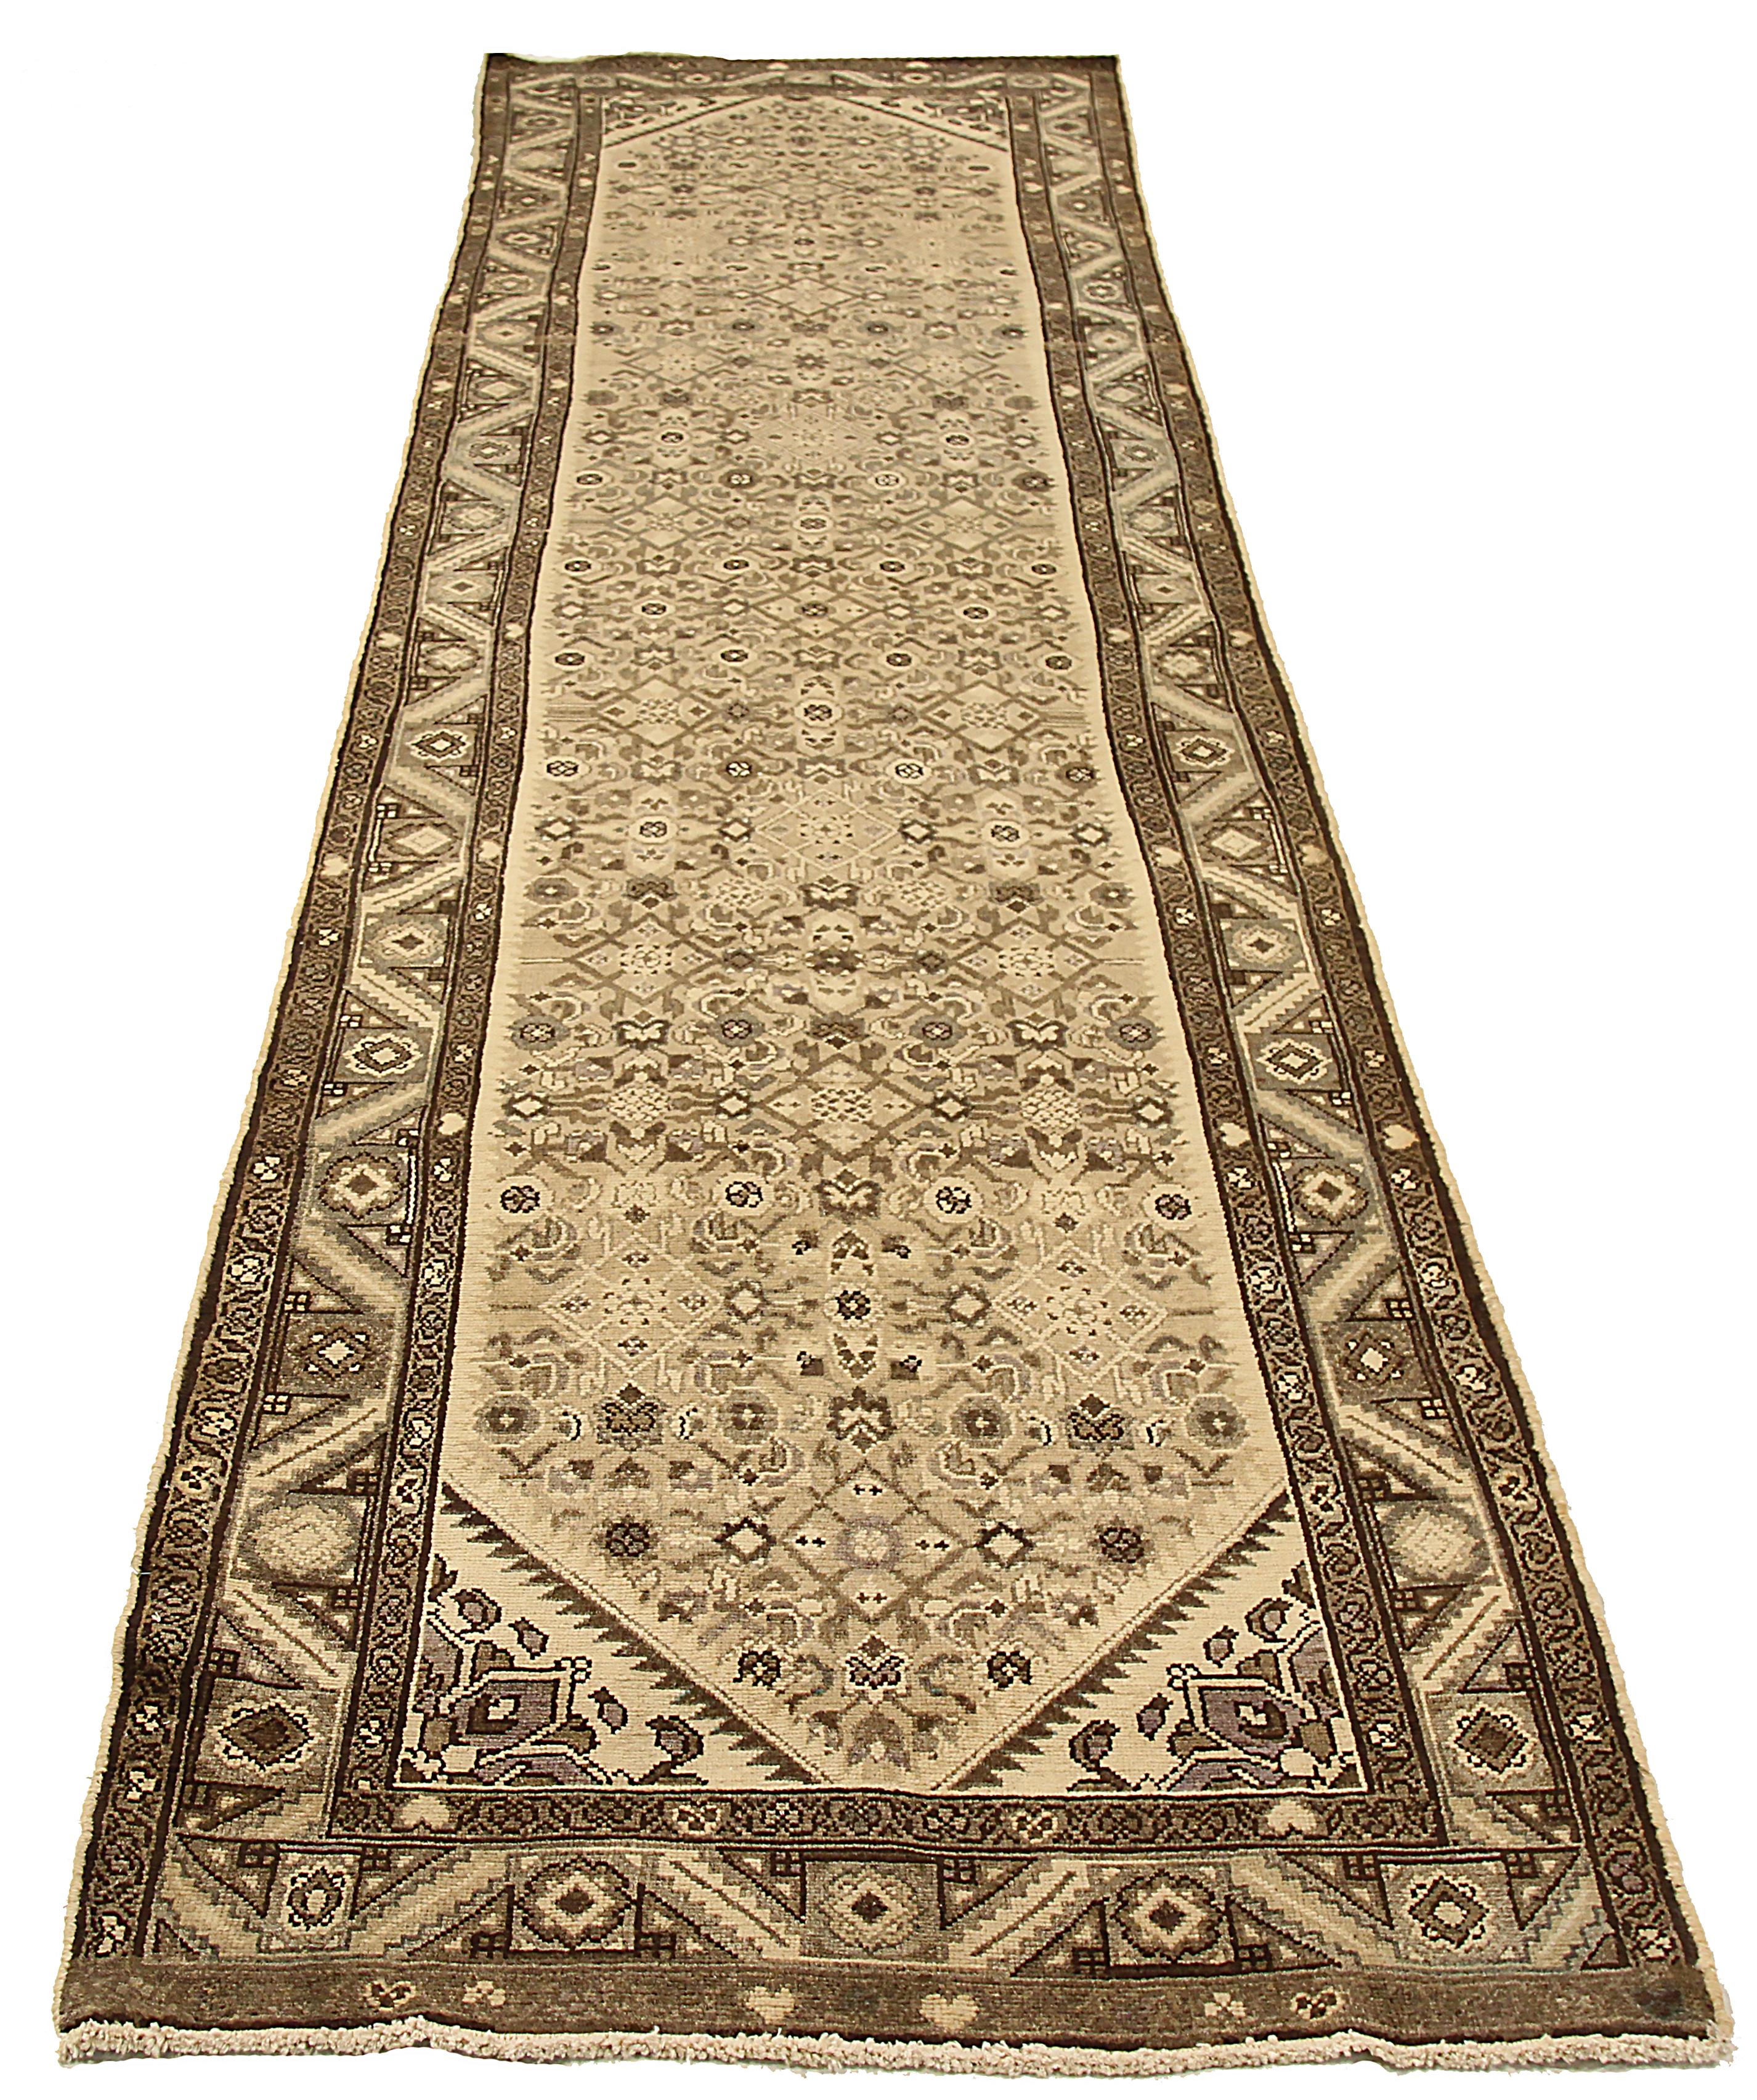 Antique Persian runner rug handwoven from the finest sheep’s wool and colored with all-natural vegetable dyes that are safe for humans and pets. It’s a traditional Hamadan design featuring geometric and floral details on an ivory field. It’s a